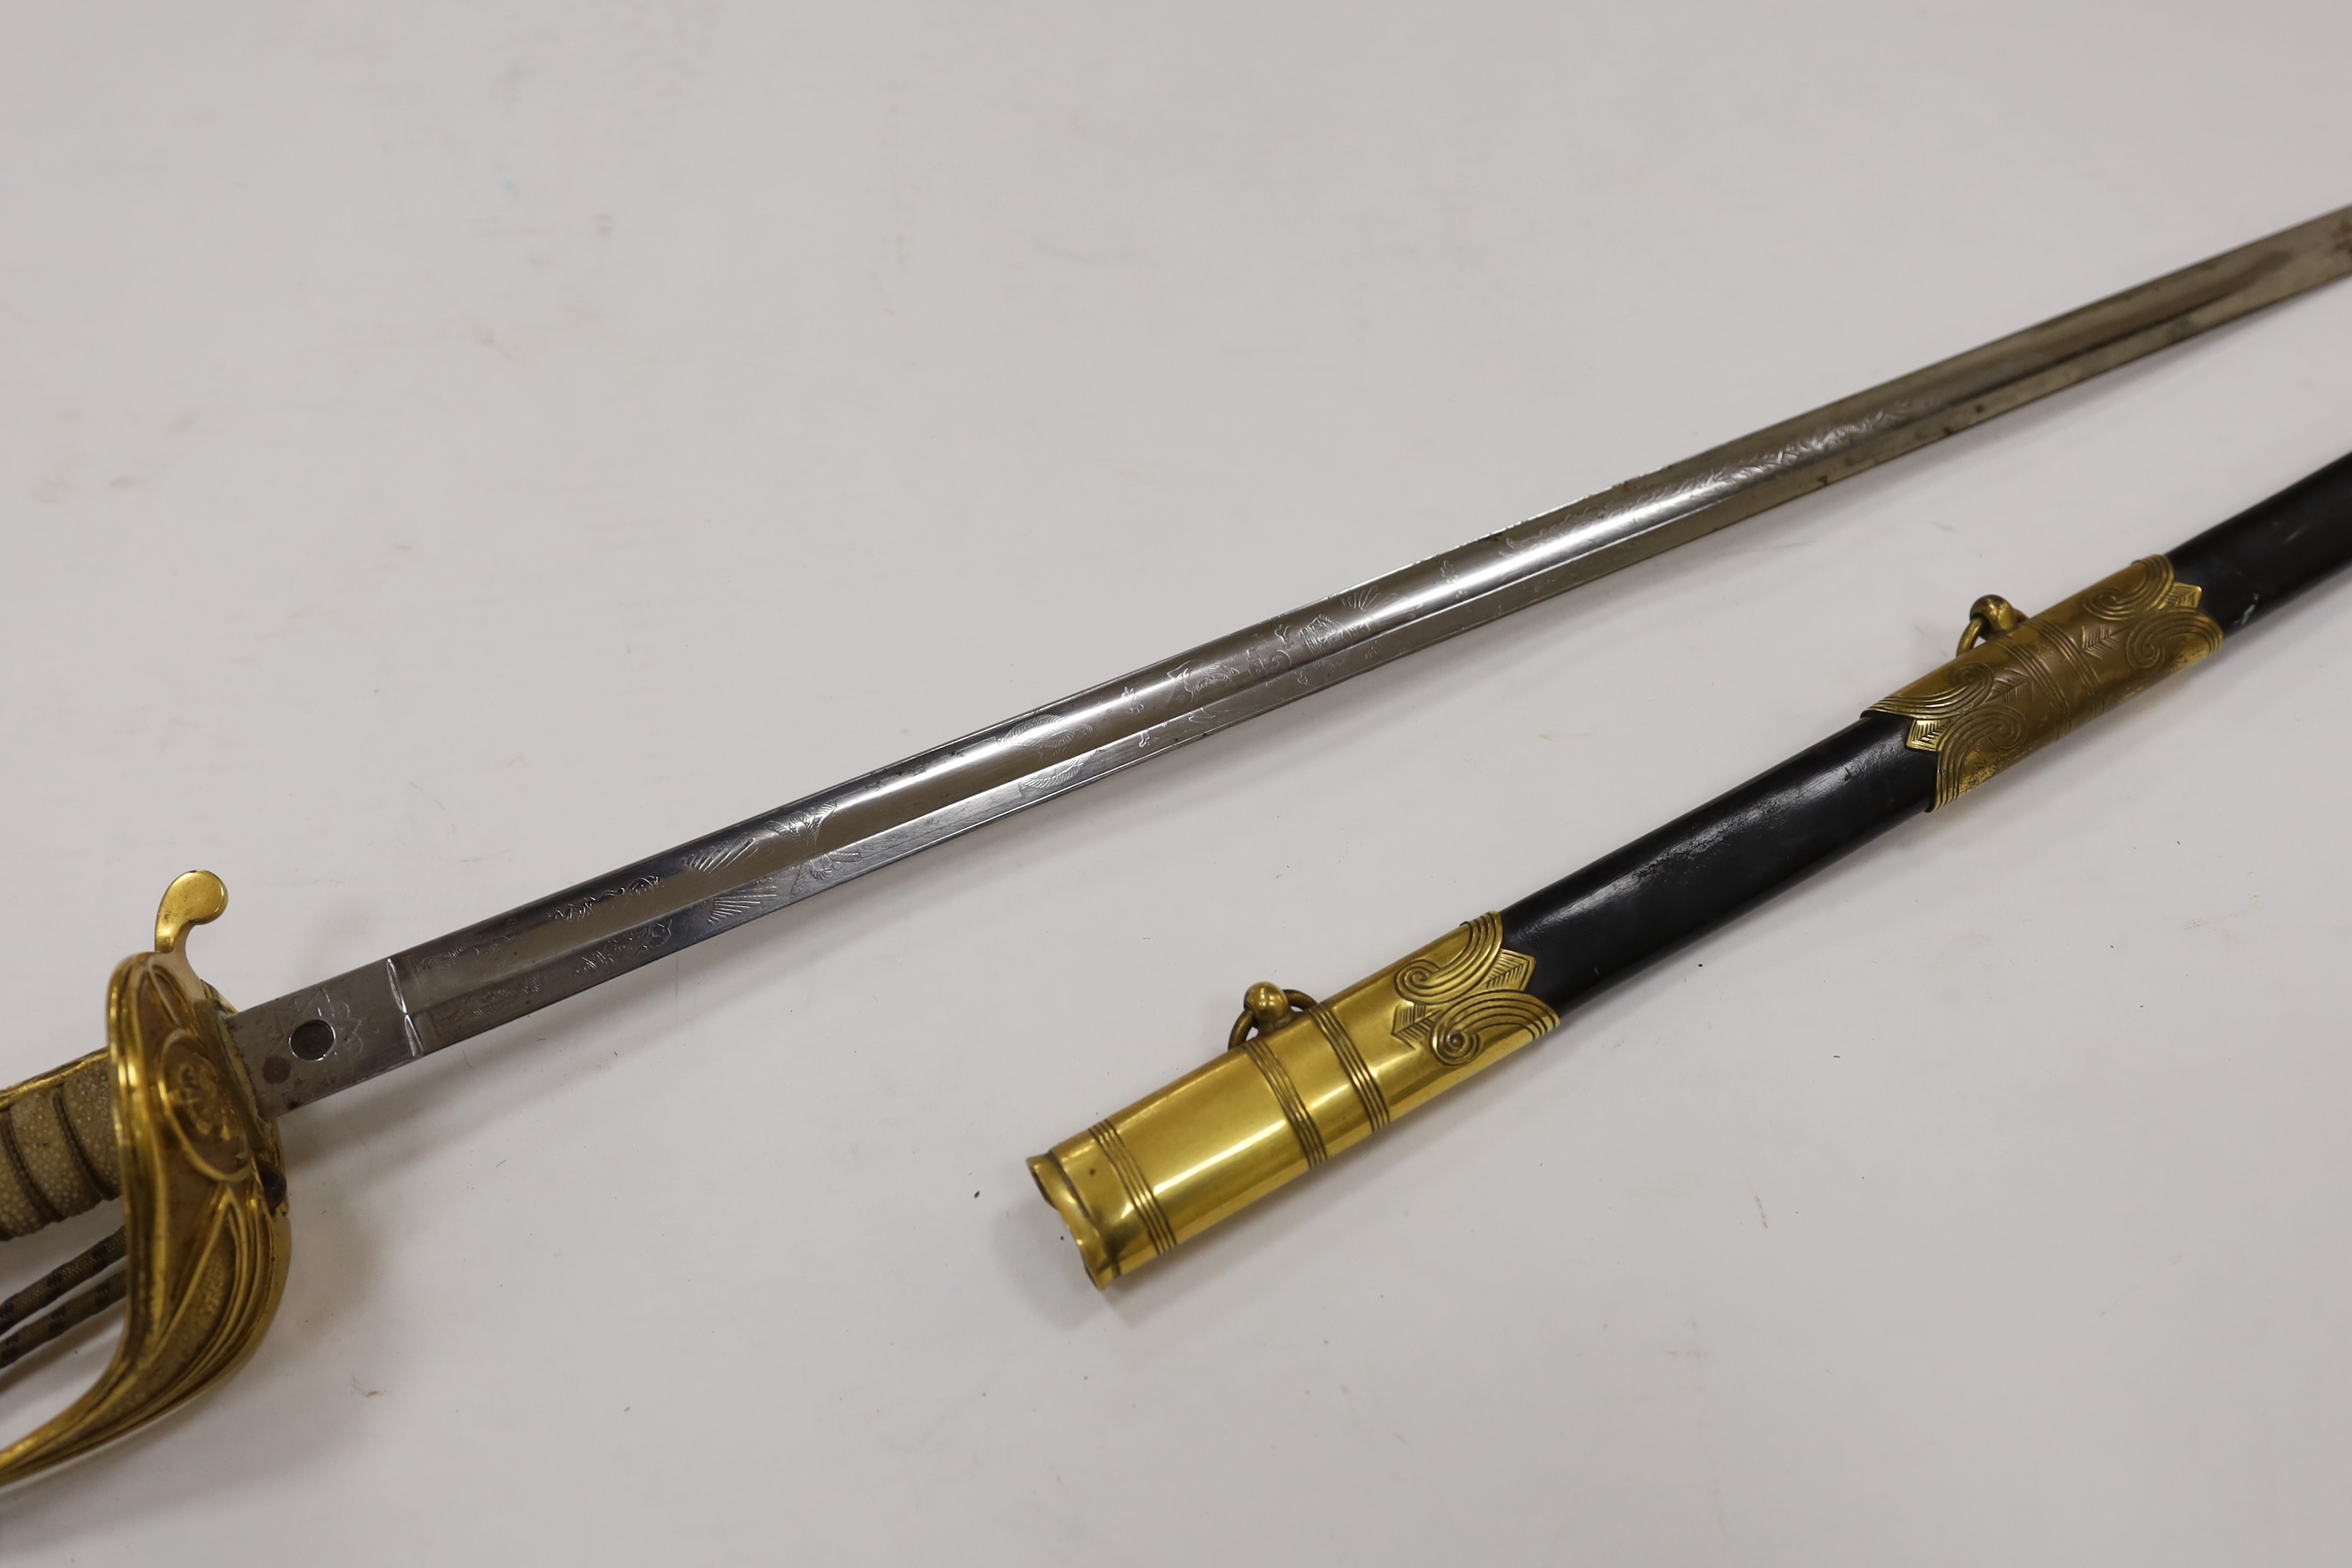 A World War I naval sword with folding guard engraved J.W. Collett R.N., regulation gilt hilt and scabbard mounts, the blade has been refinished and furniture regilded, with bullion dress knot, blade 78.5cm